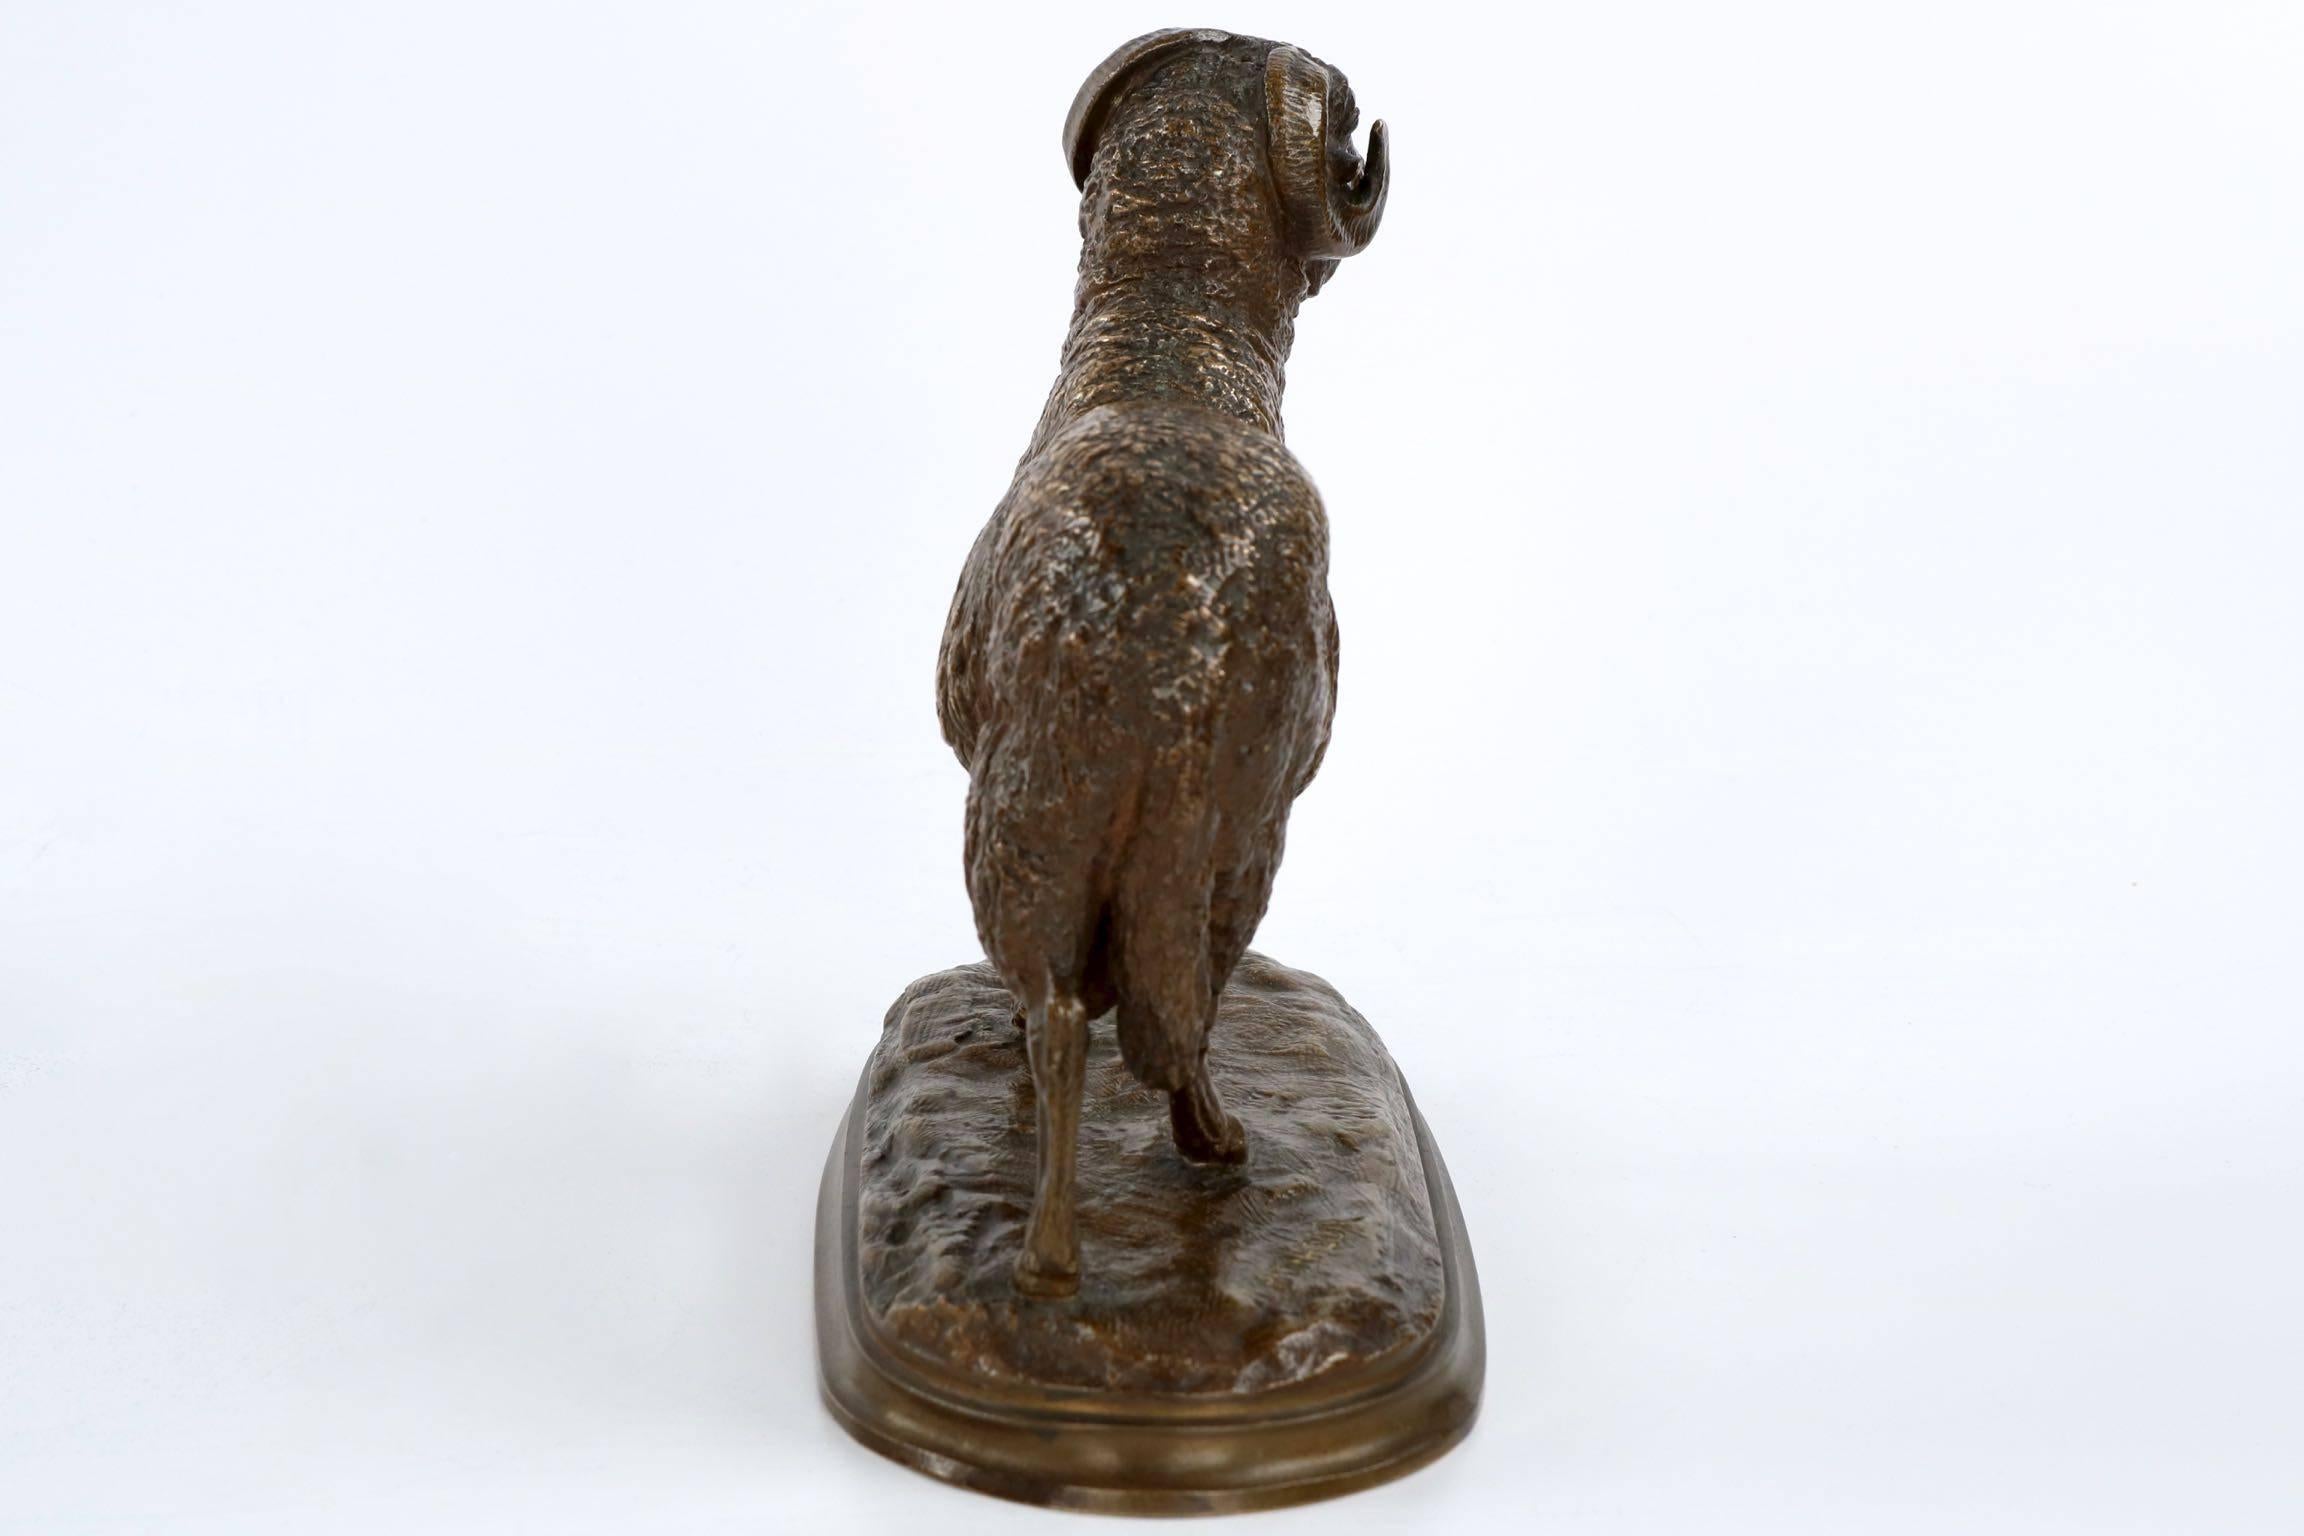 Patinated Antique Bronze Sculpture of Ram by Isidore Bonheur & Peyrol Foundry, circa 1870